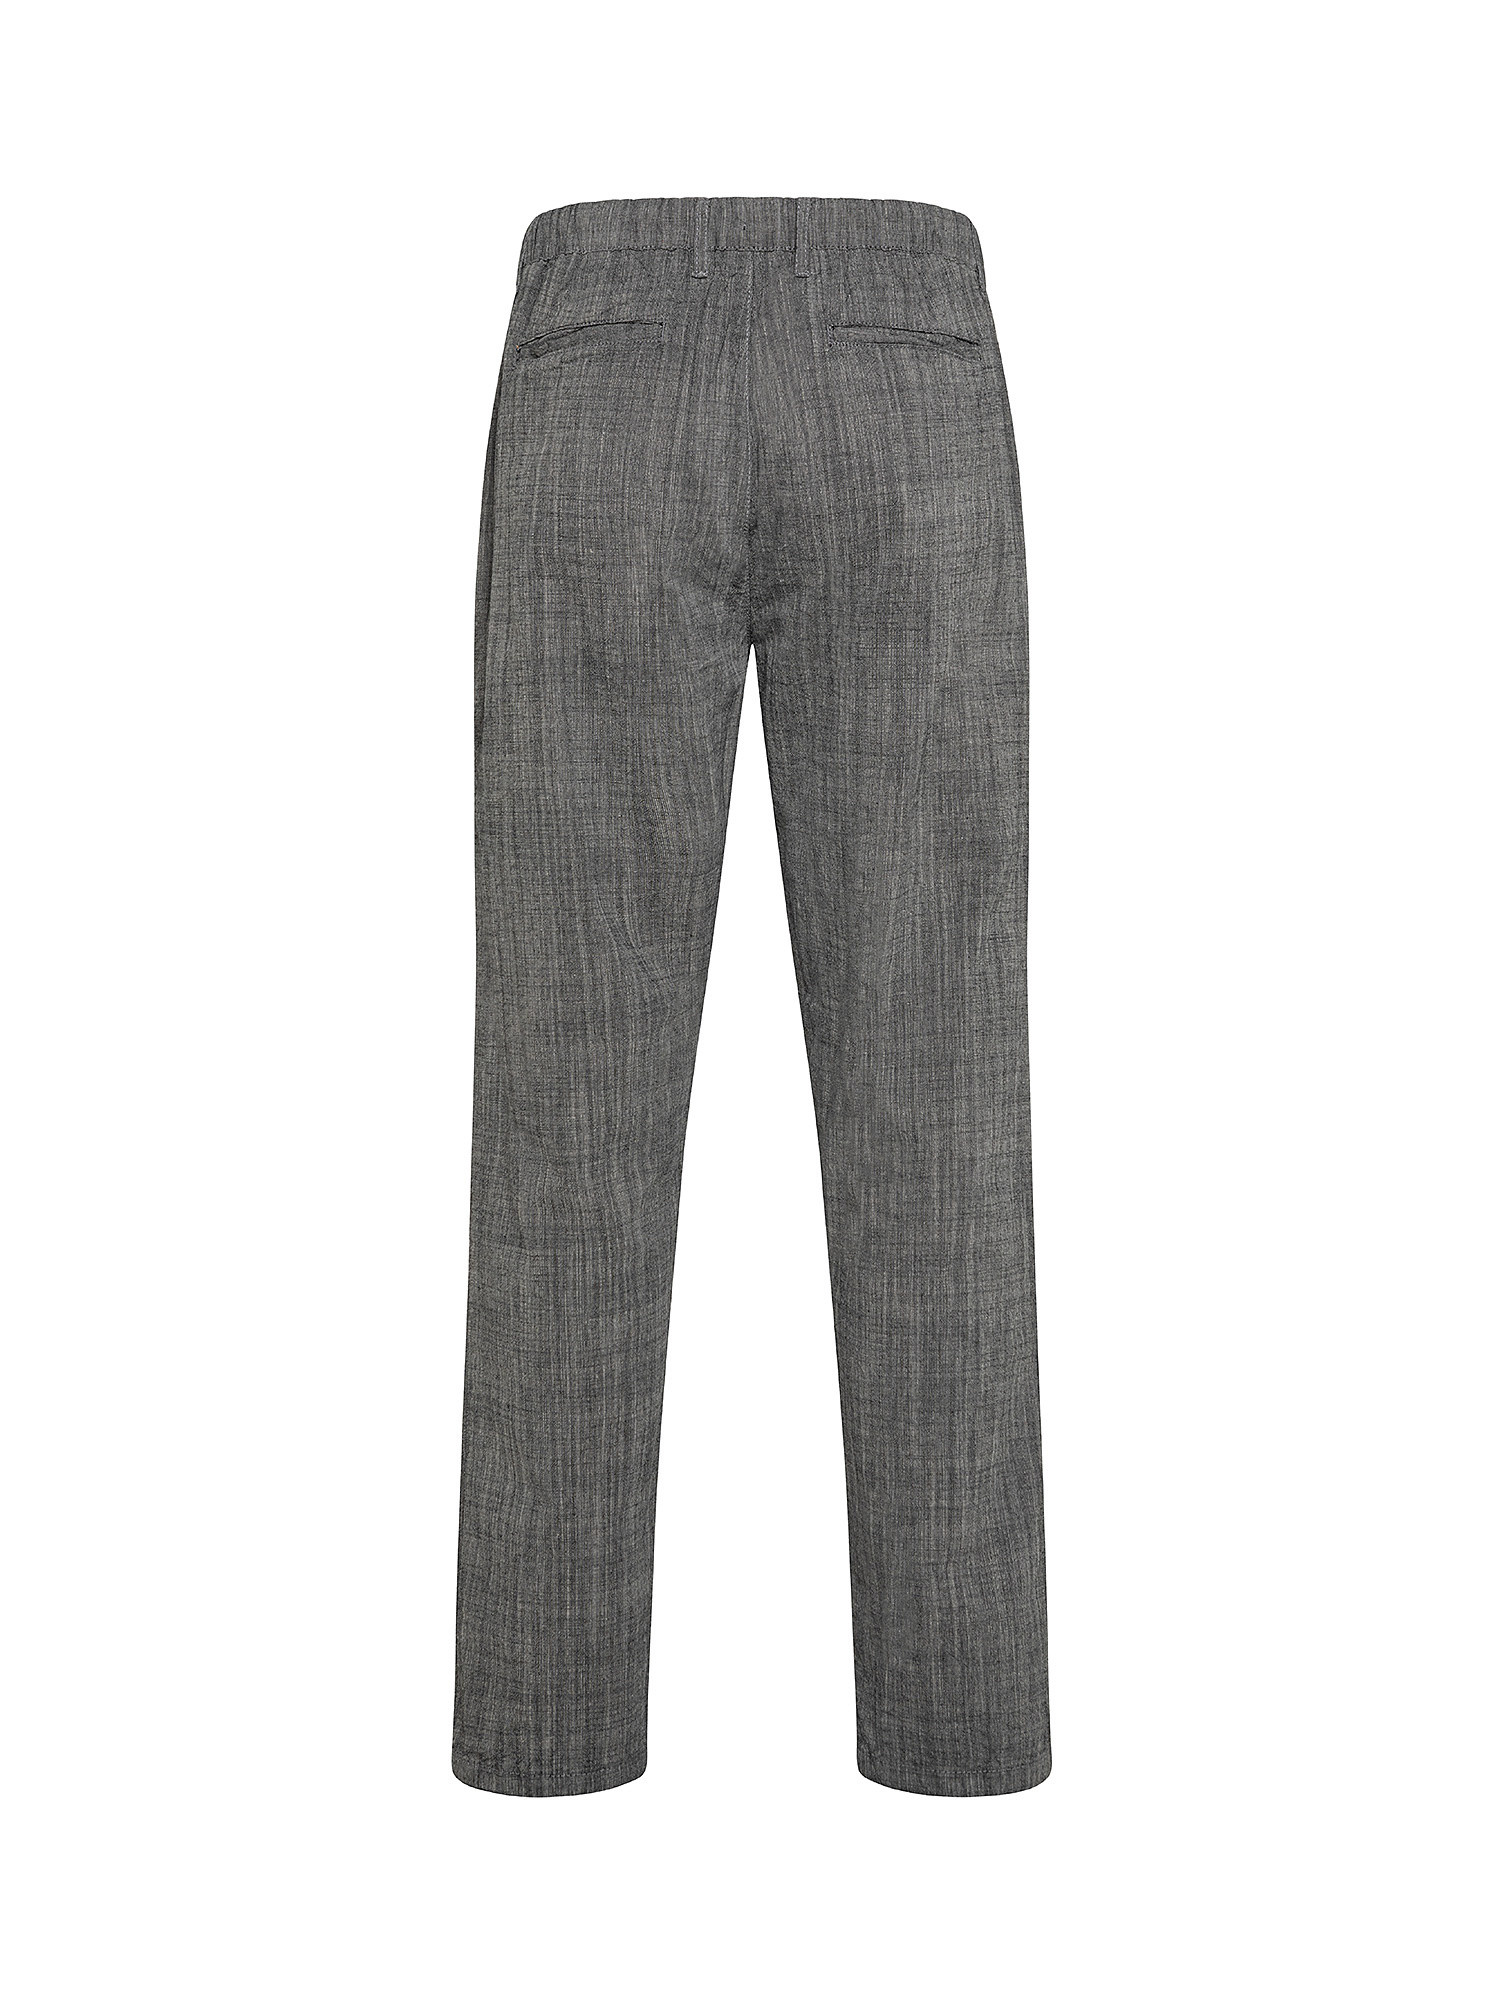 Pantalone con coulisse, Grigio, large image number 1